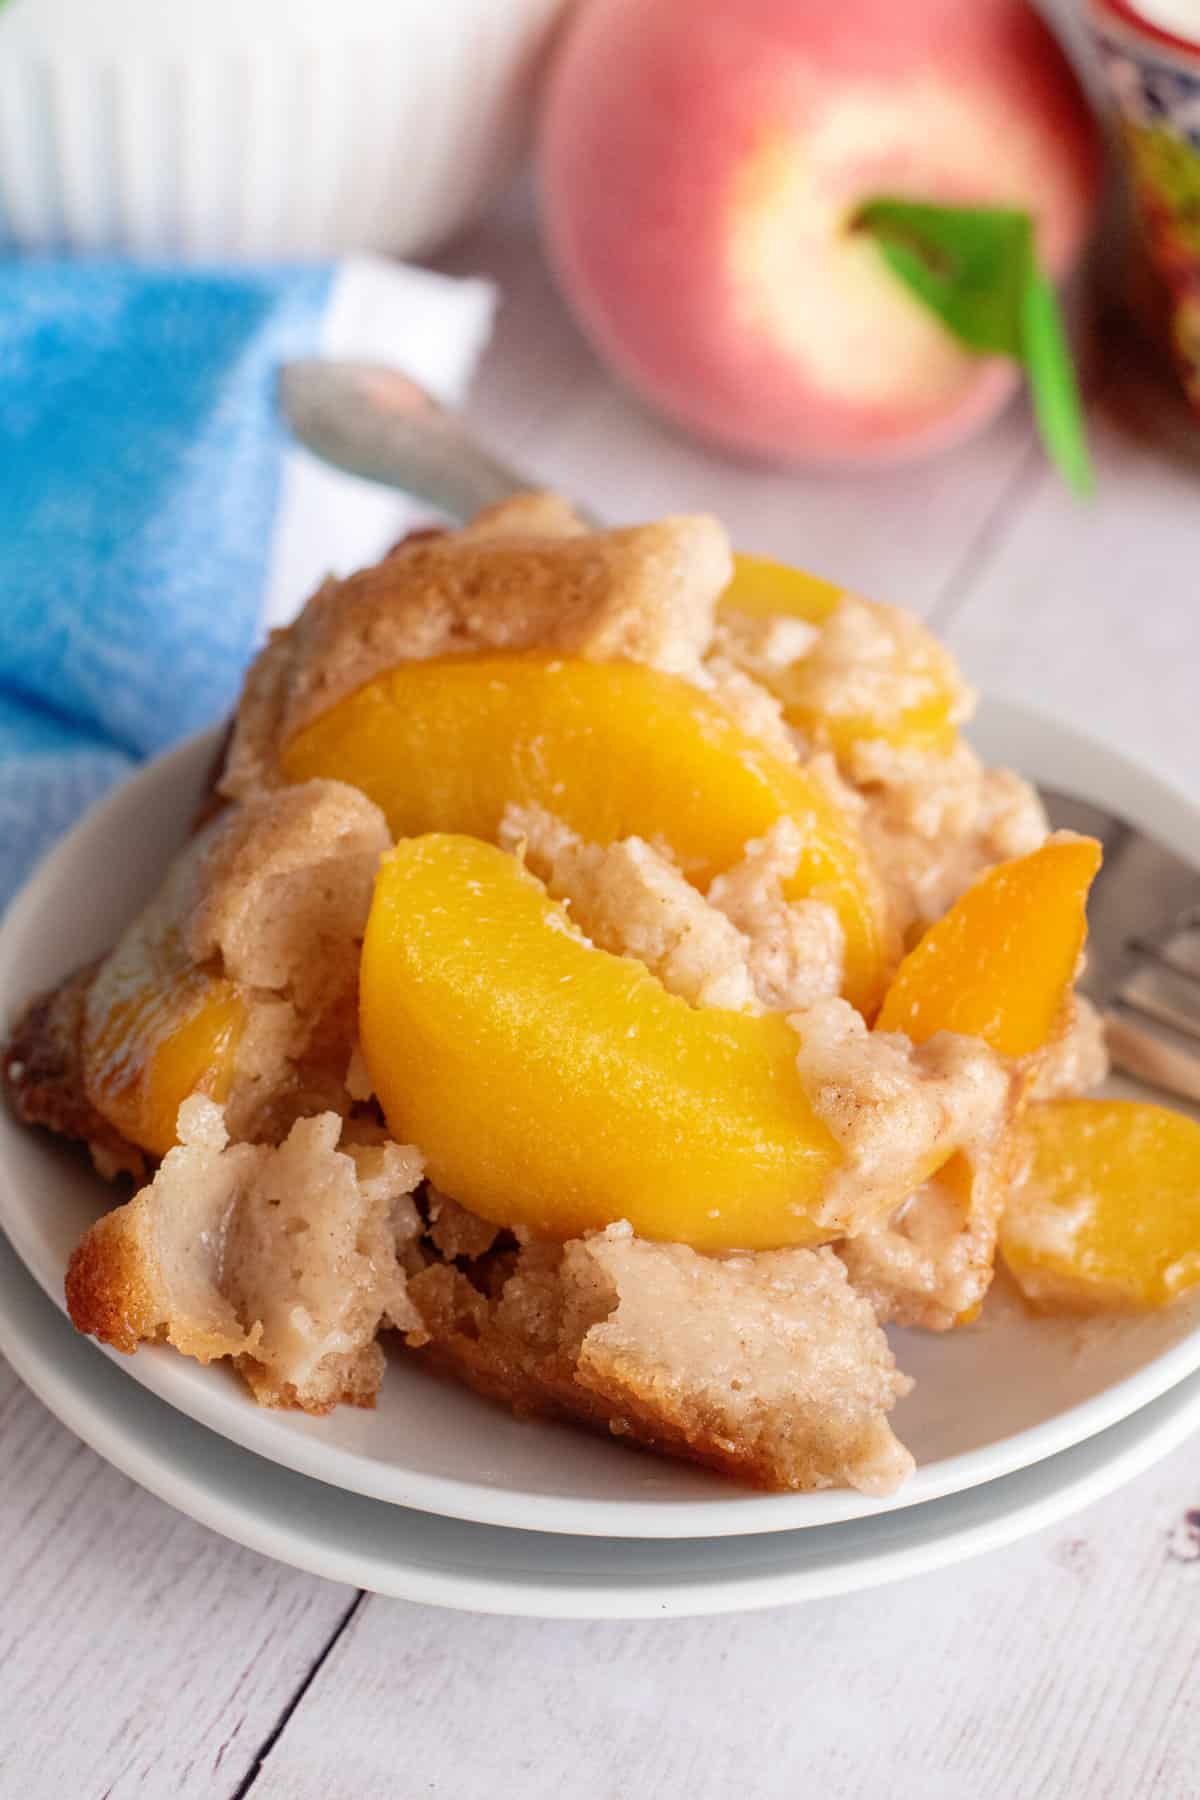 Serving of old-fashioned peach cobbler.